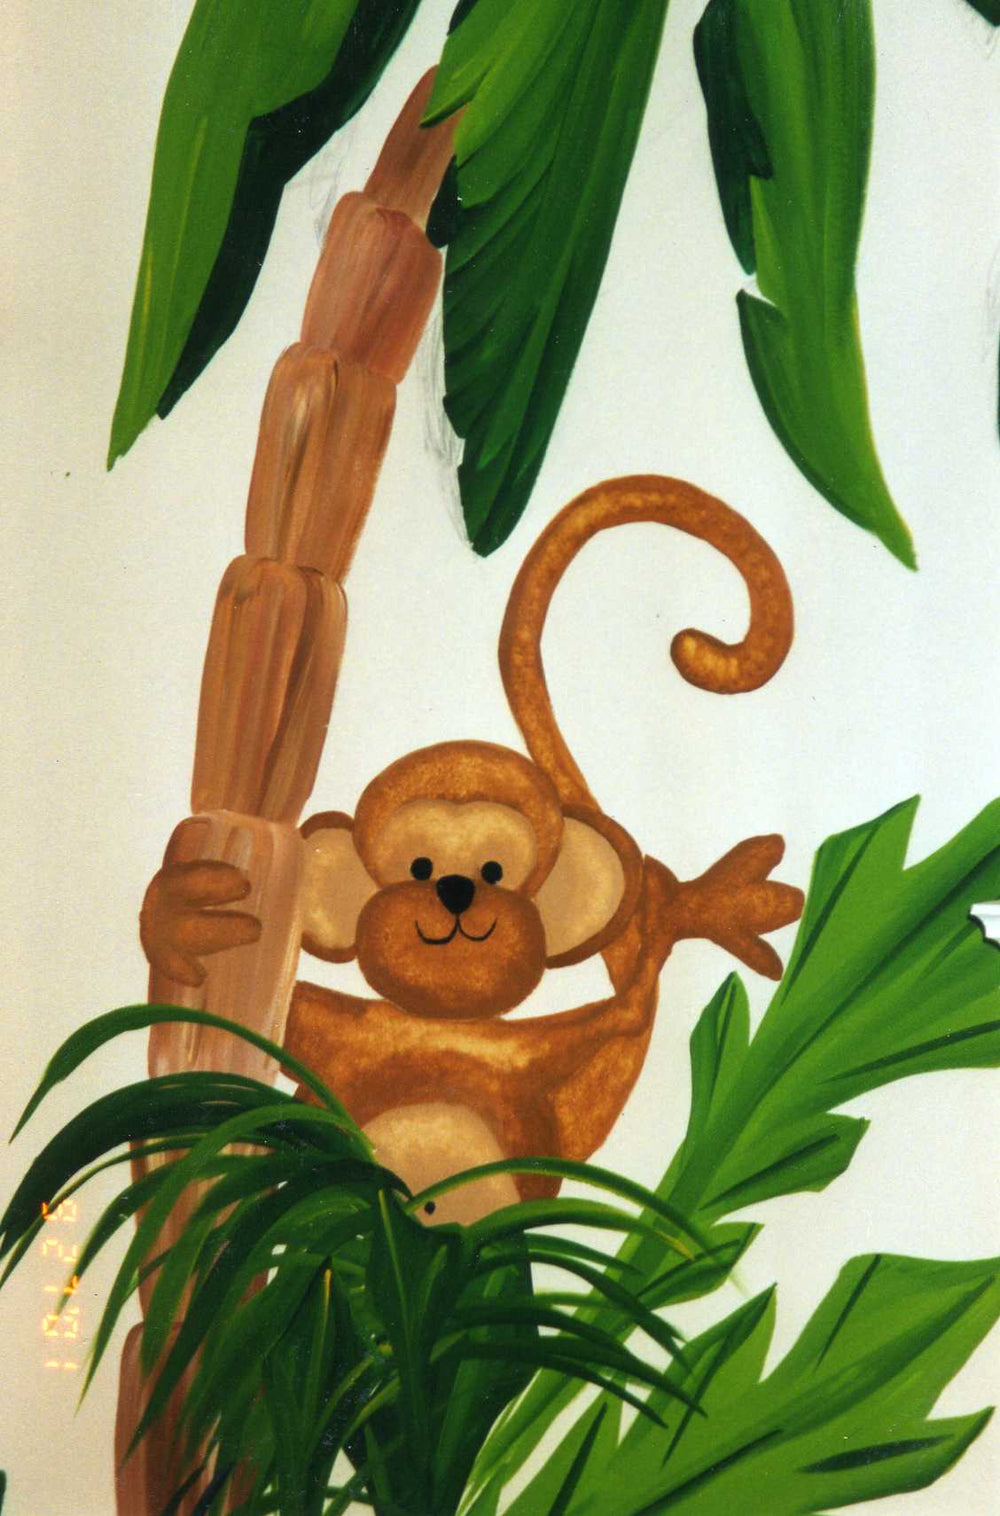 "Monkey in the Jungle"